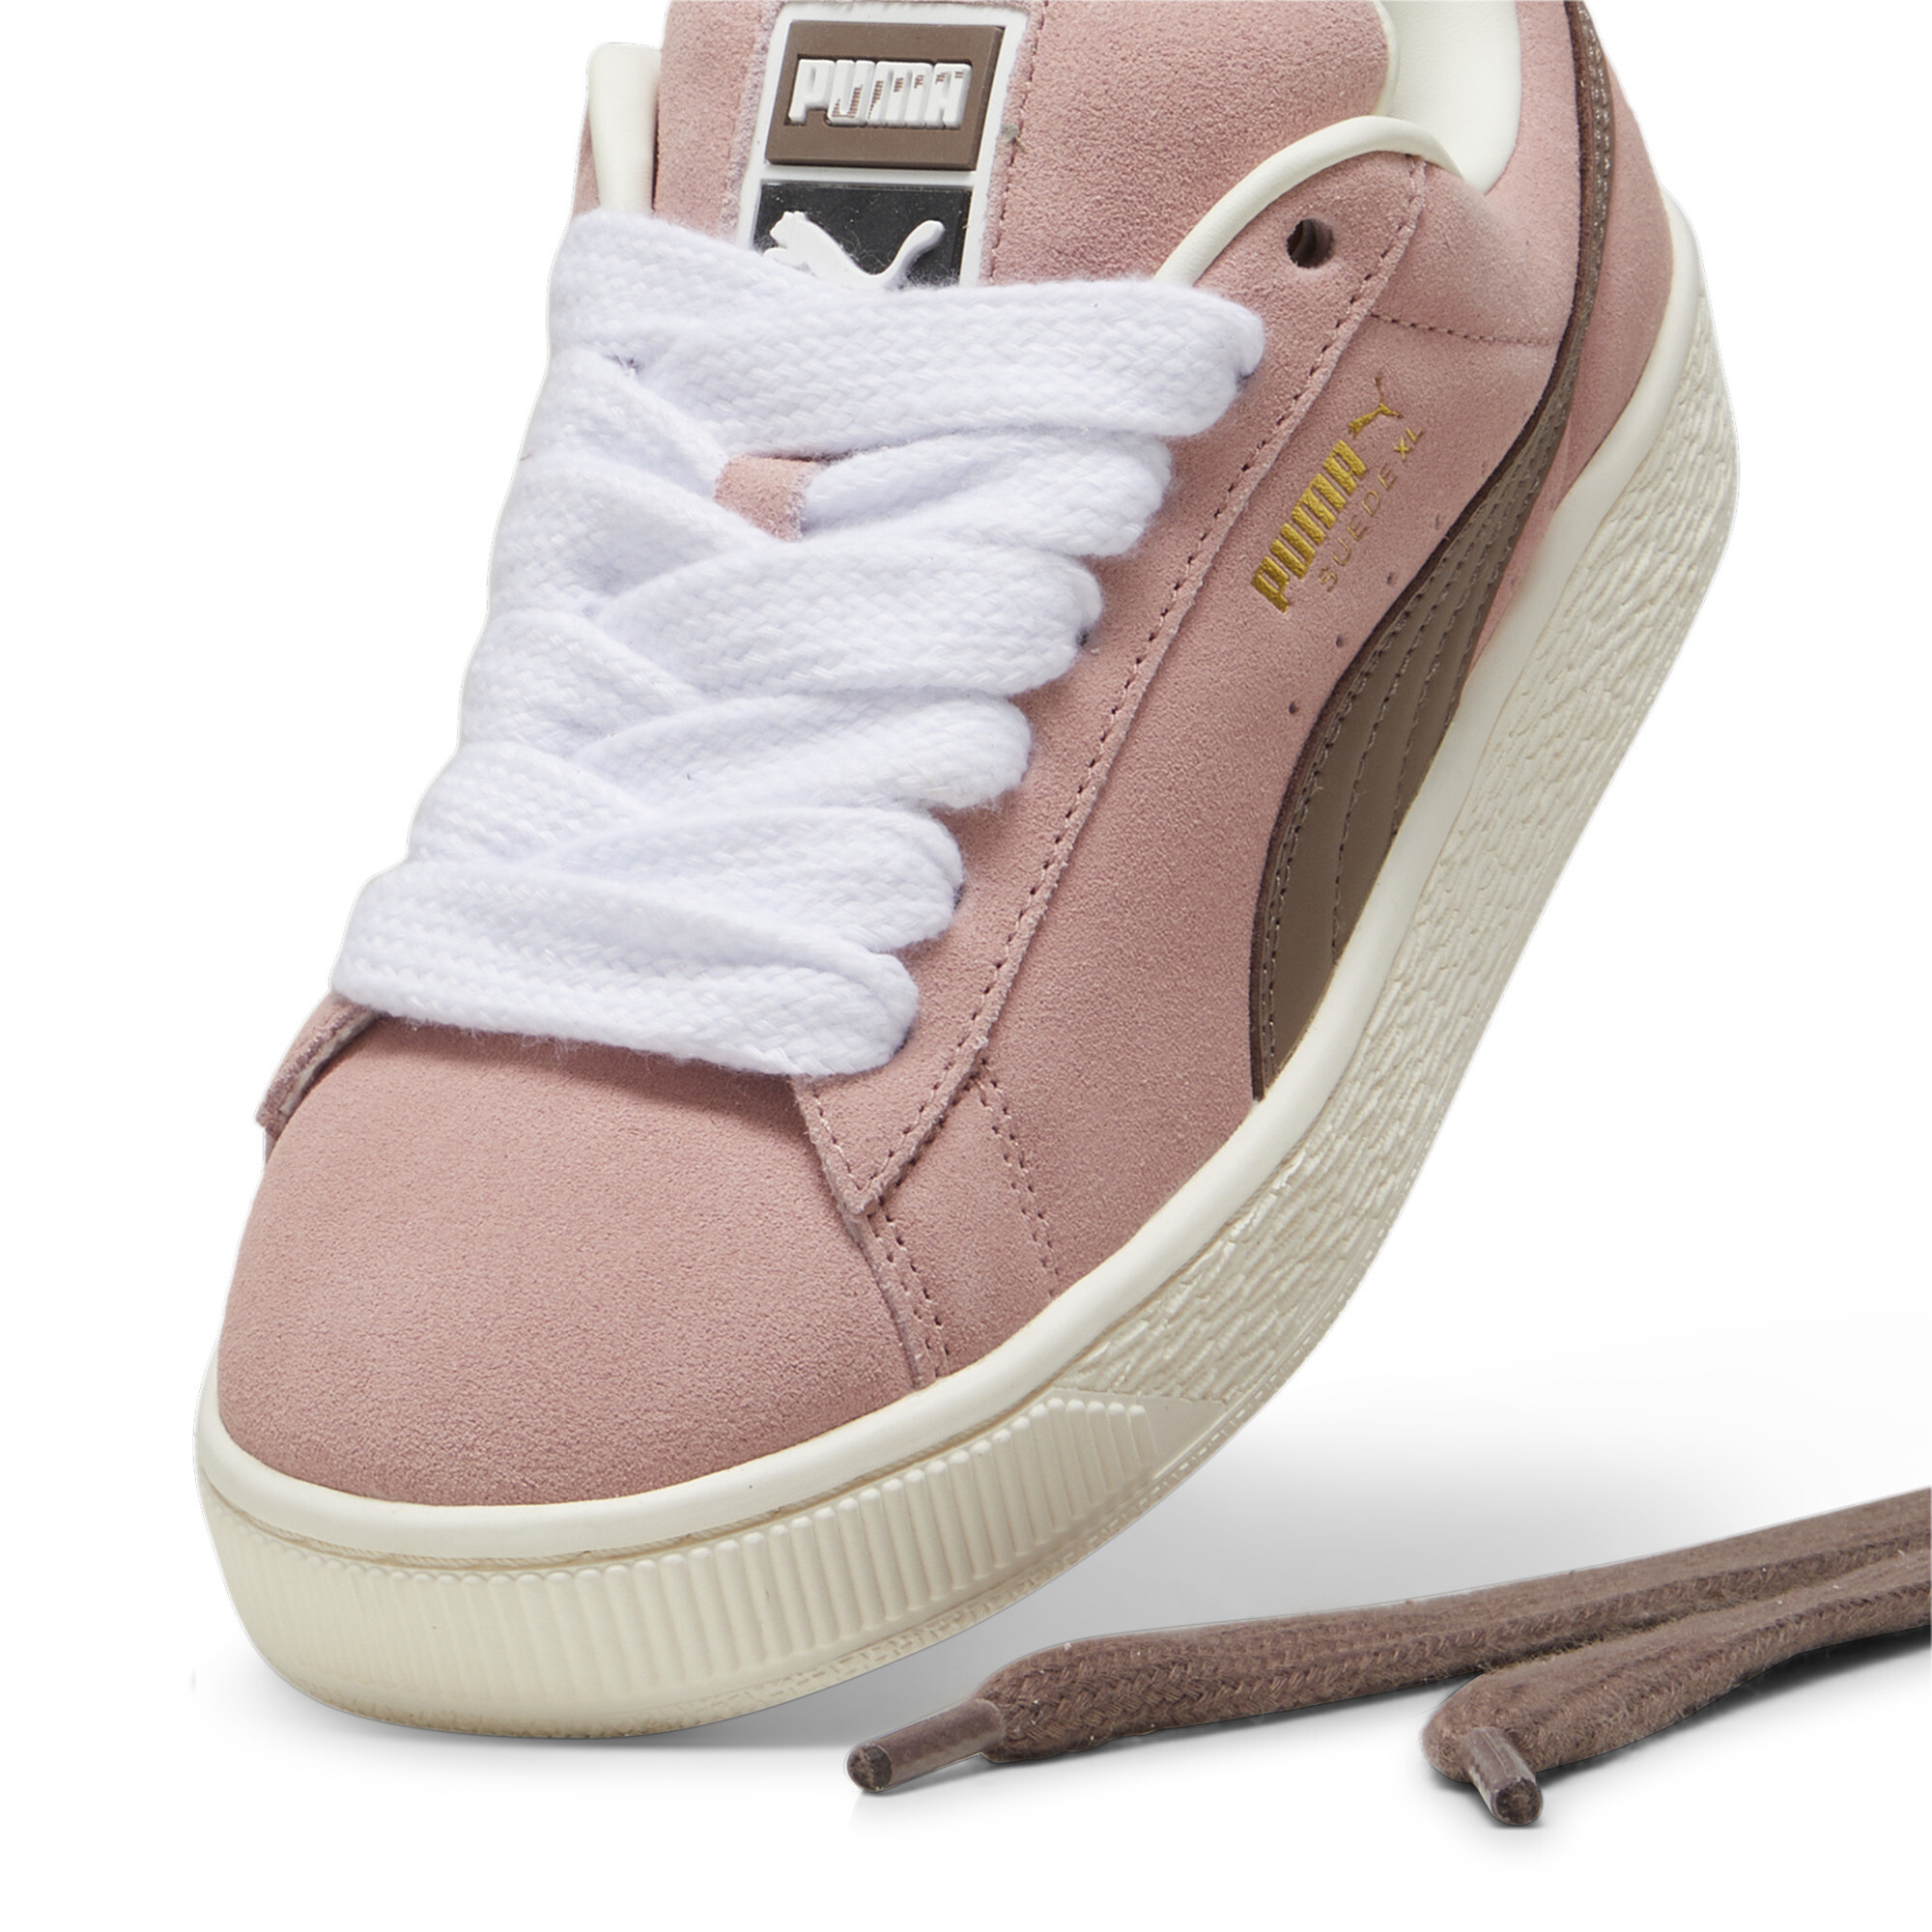 Puma Suede XL Sneakers Unisex, Pink, Size 36, Shoes